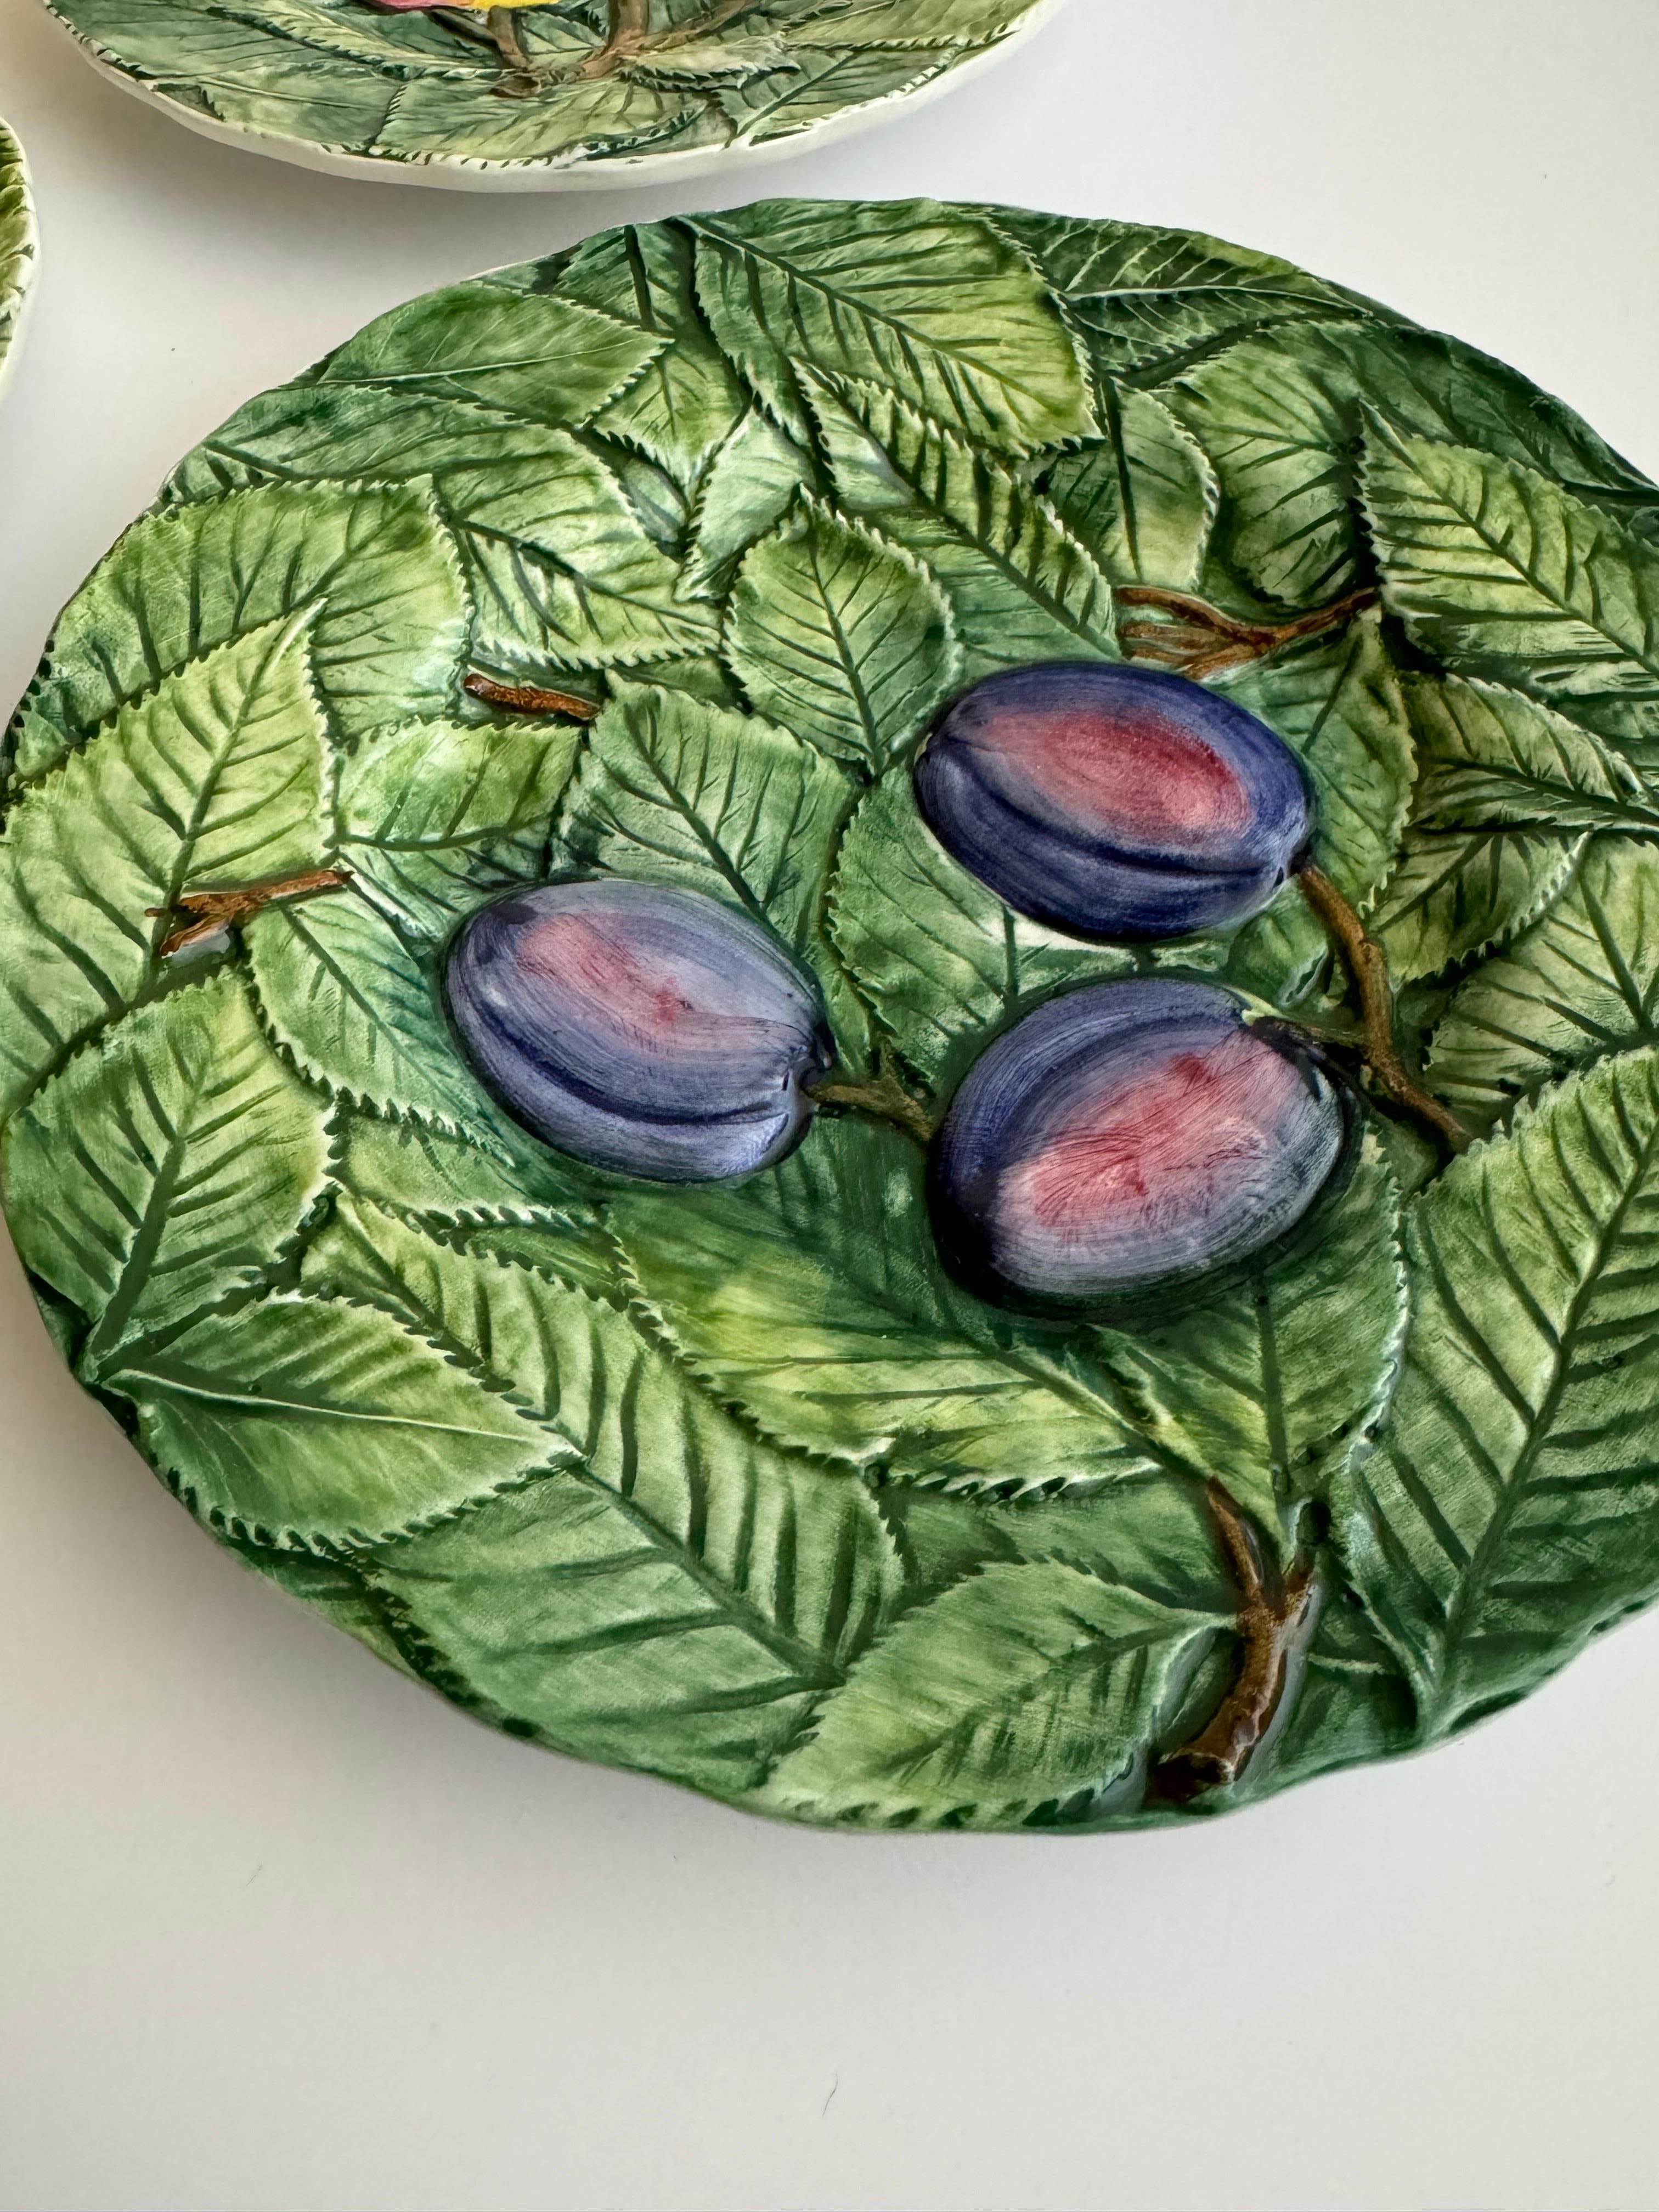 20th Century 3 Trompe-L’oeil Majolica chargers/Salad Plates Made in Italy for Neiman Marcus